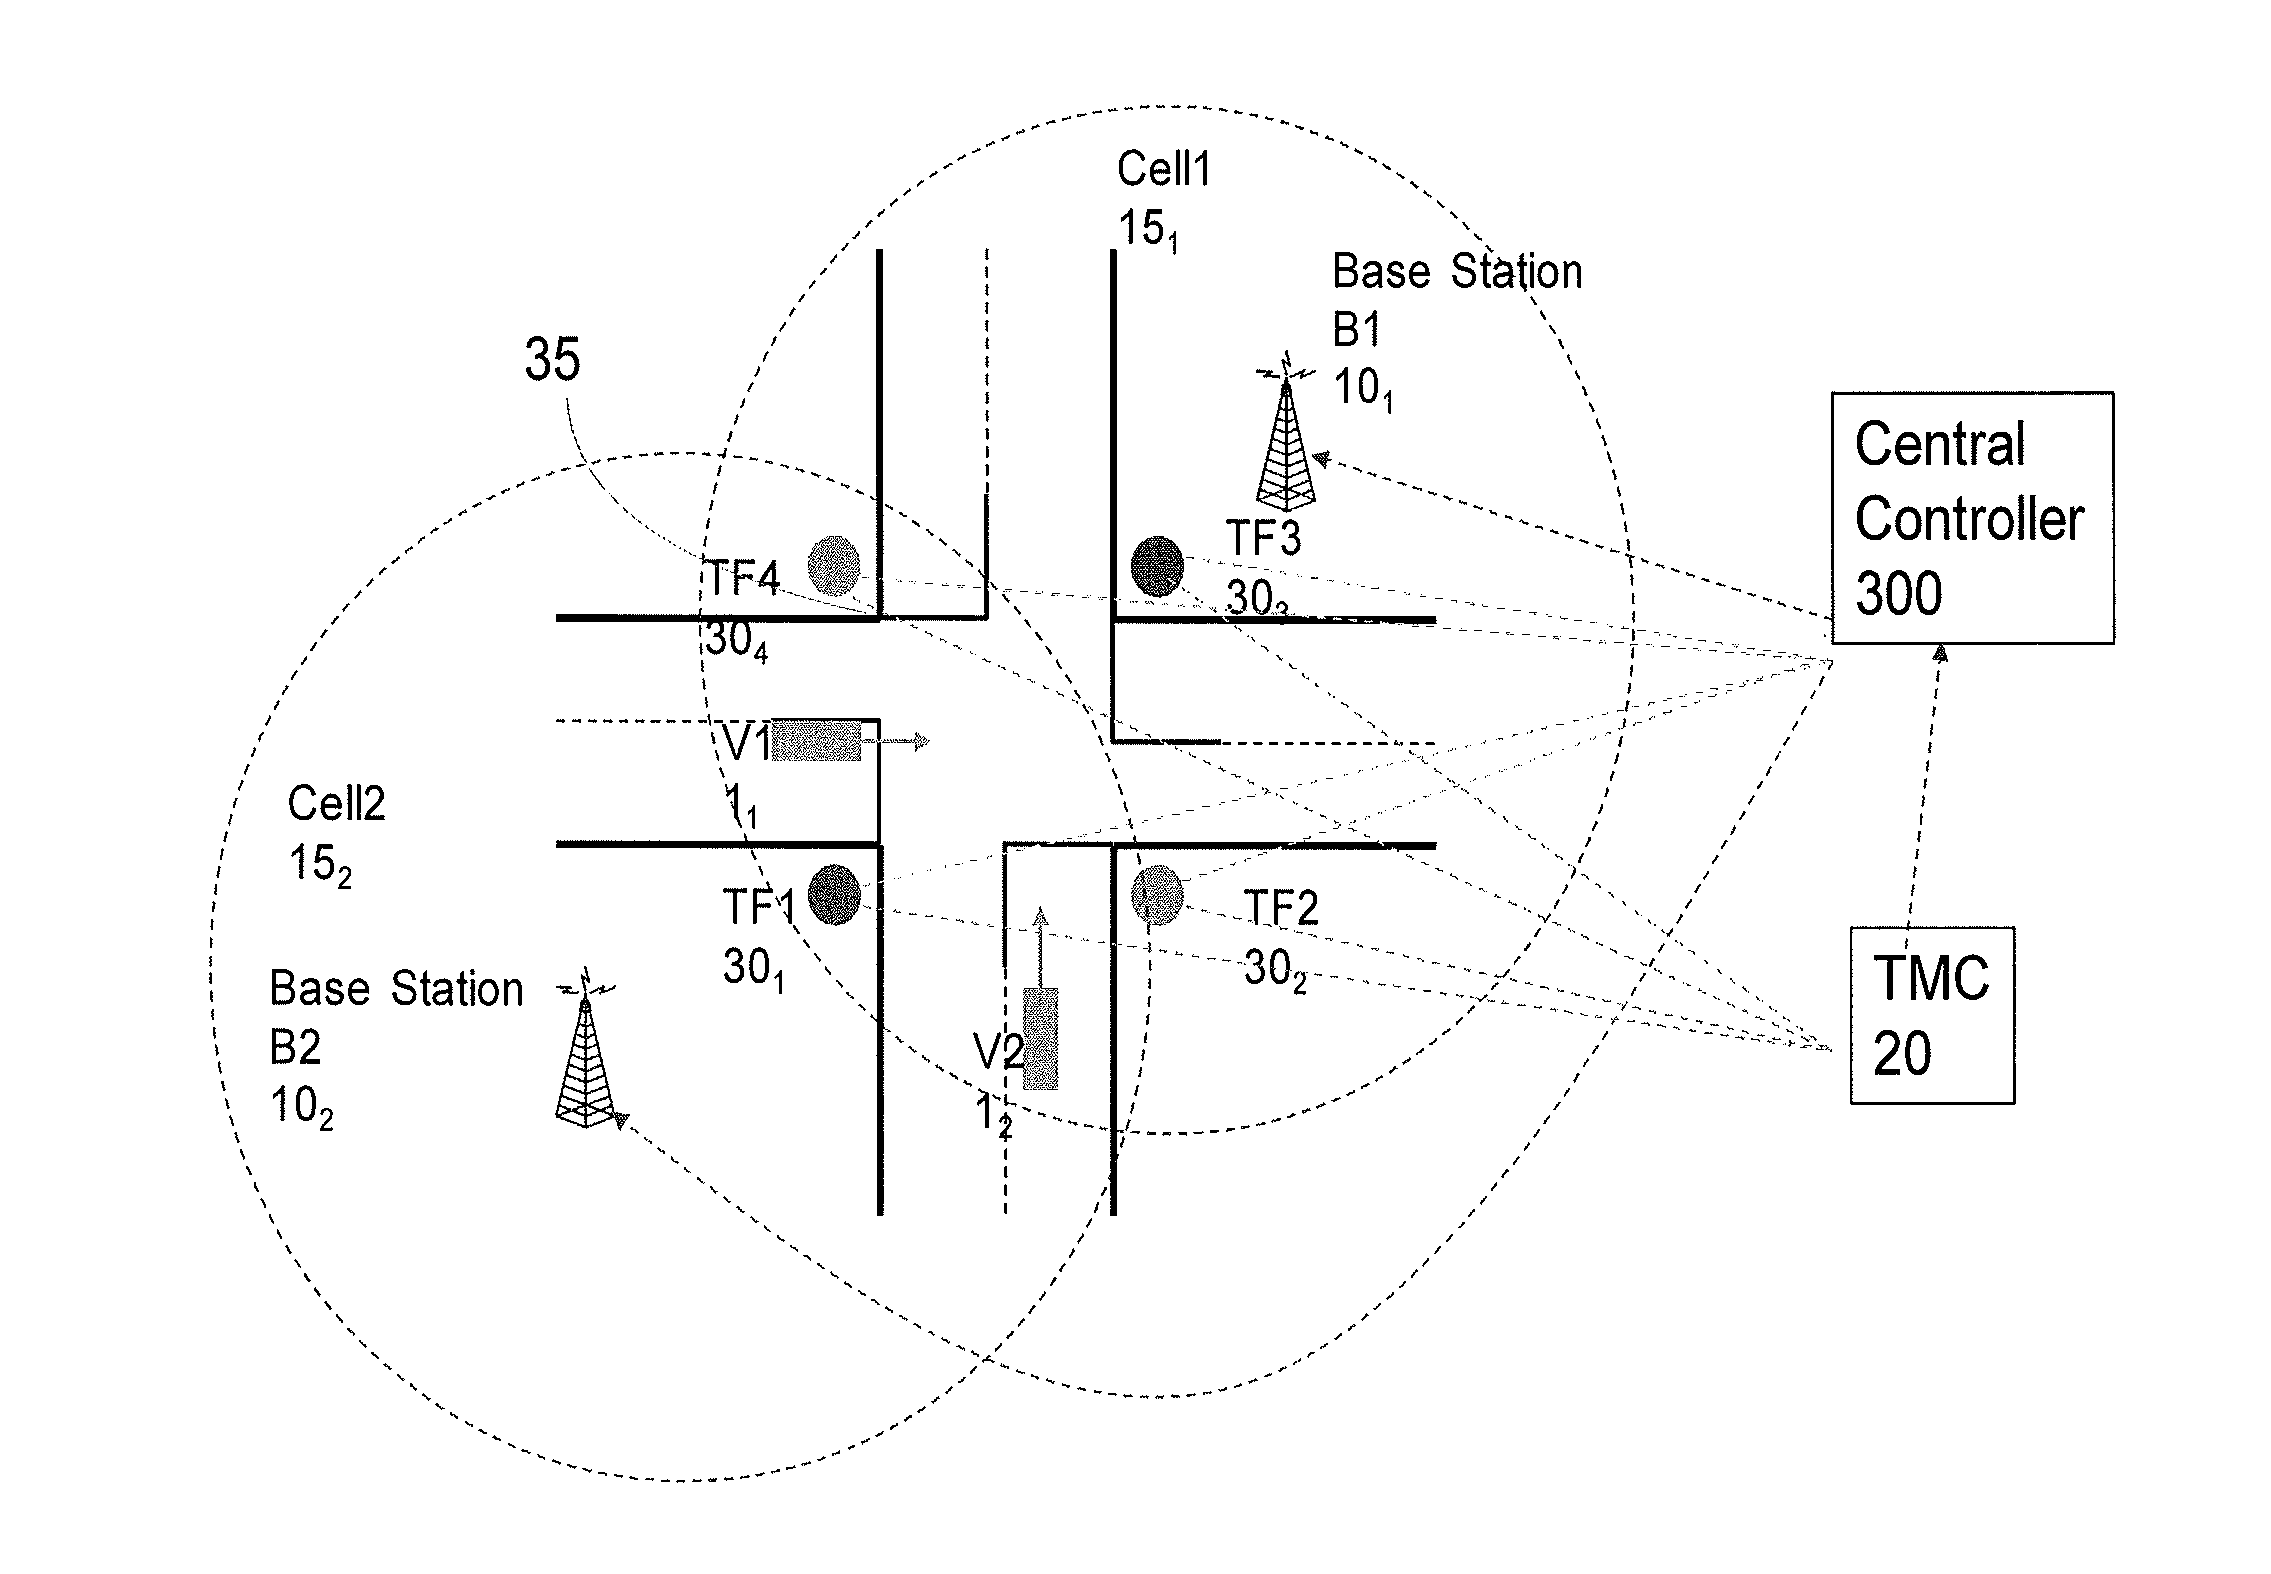 System, Method, Control Device and Program for Vehicle Collision Avoidance Using Cellular Communication